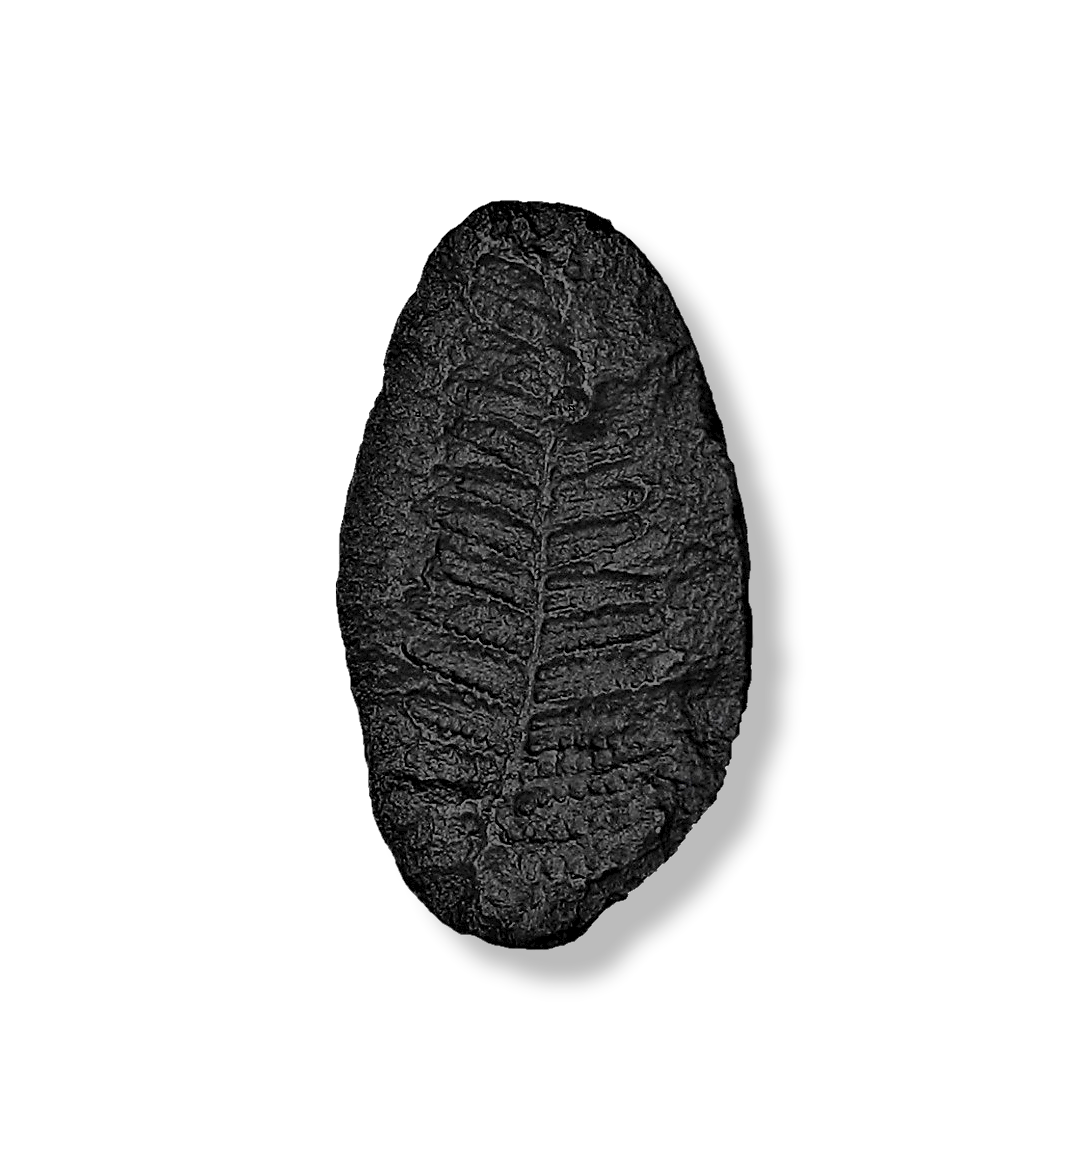 Our Fern Fossil Knob was found in nature and captured in solid bronze. It has the irregular shape and texture of the original stone, including the imprint of the Fern Leaf.